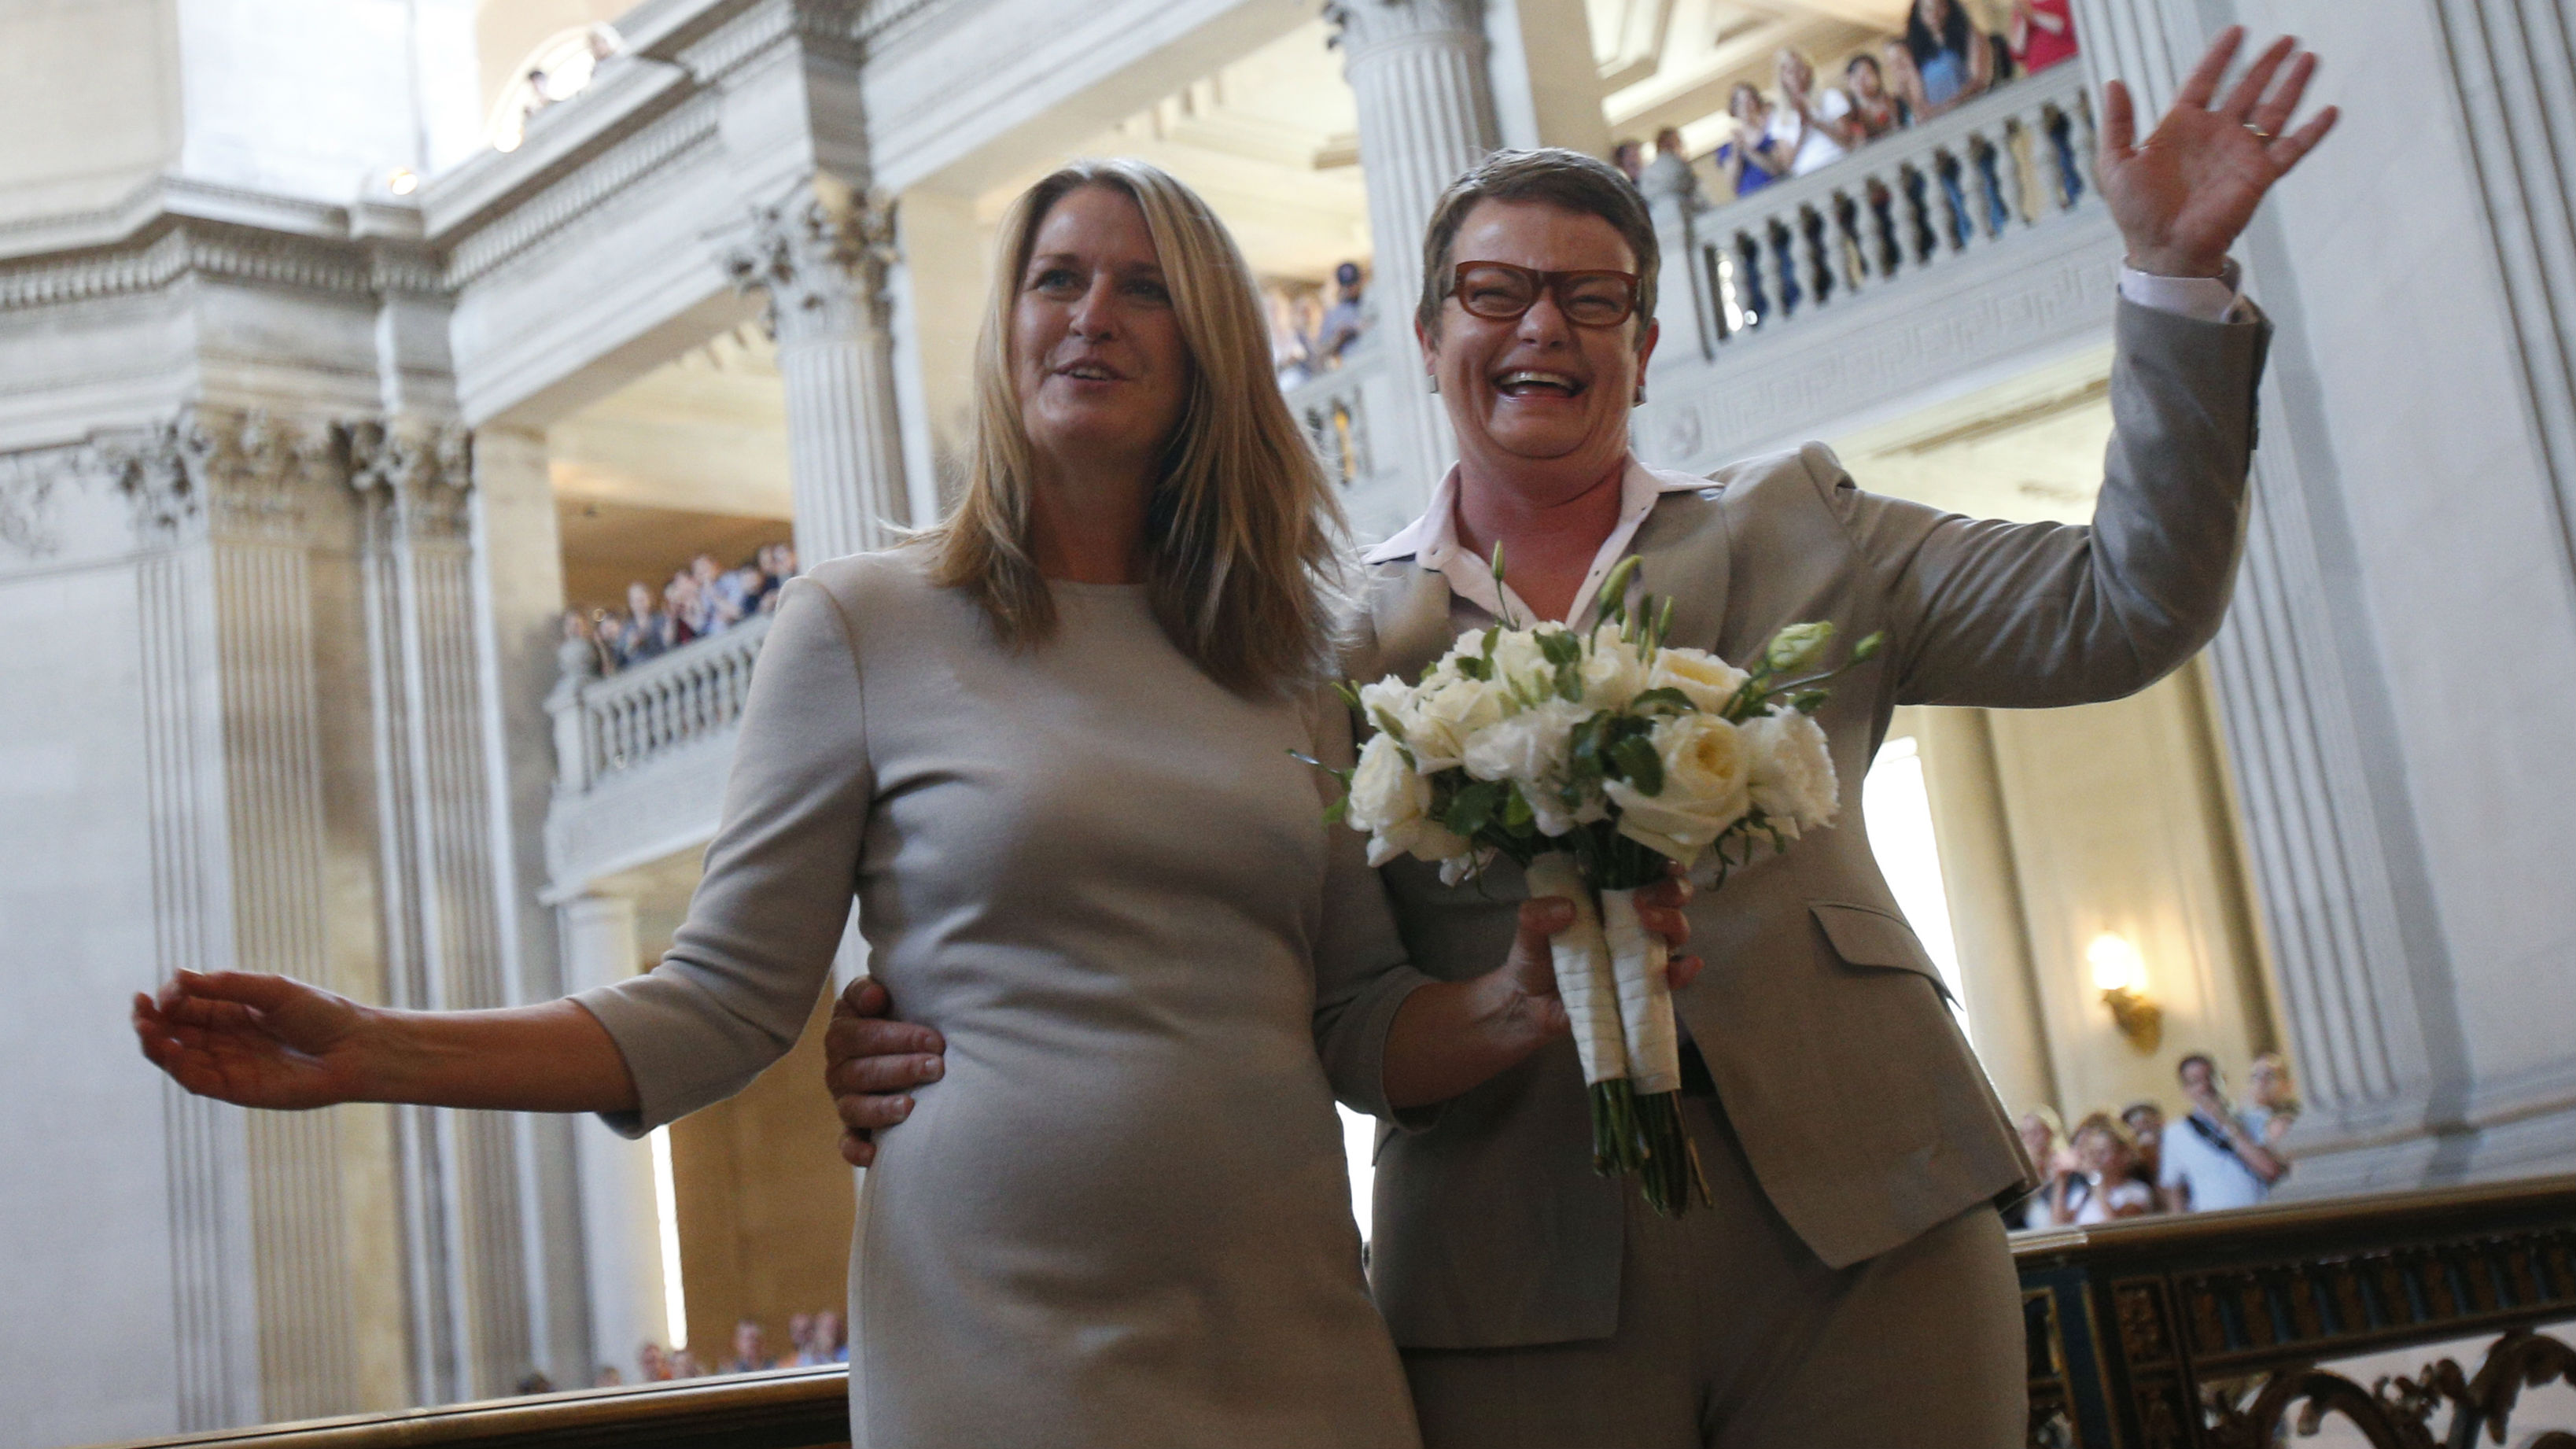 Kris Perry and Sandy Stier marry (reuters)